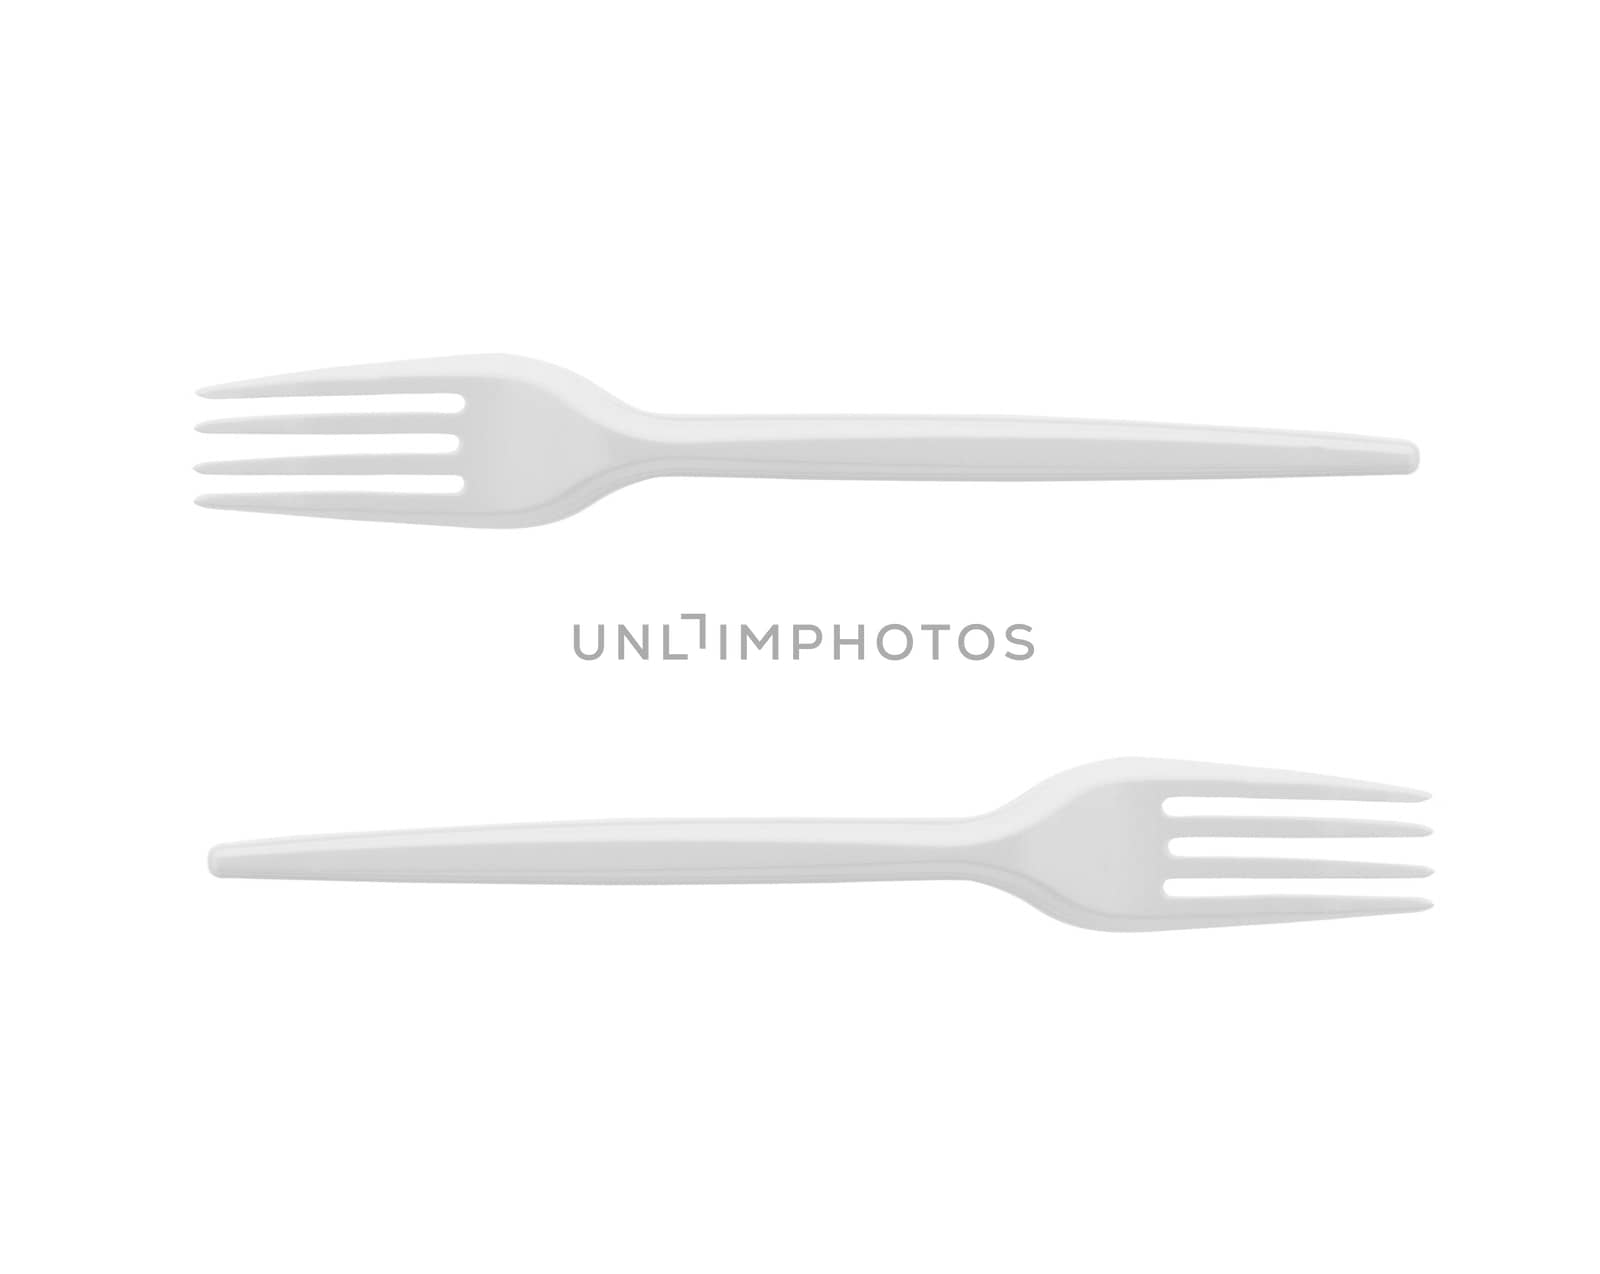 Plastic Forks on White Background by ozaiachin